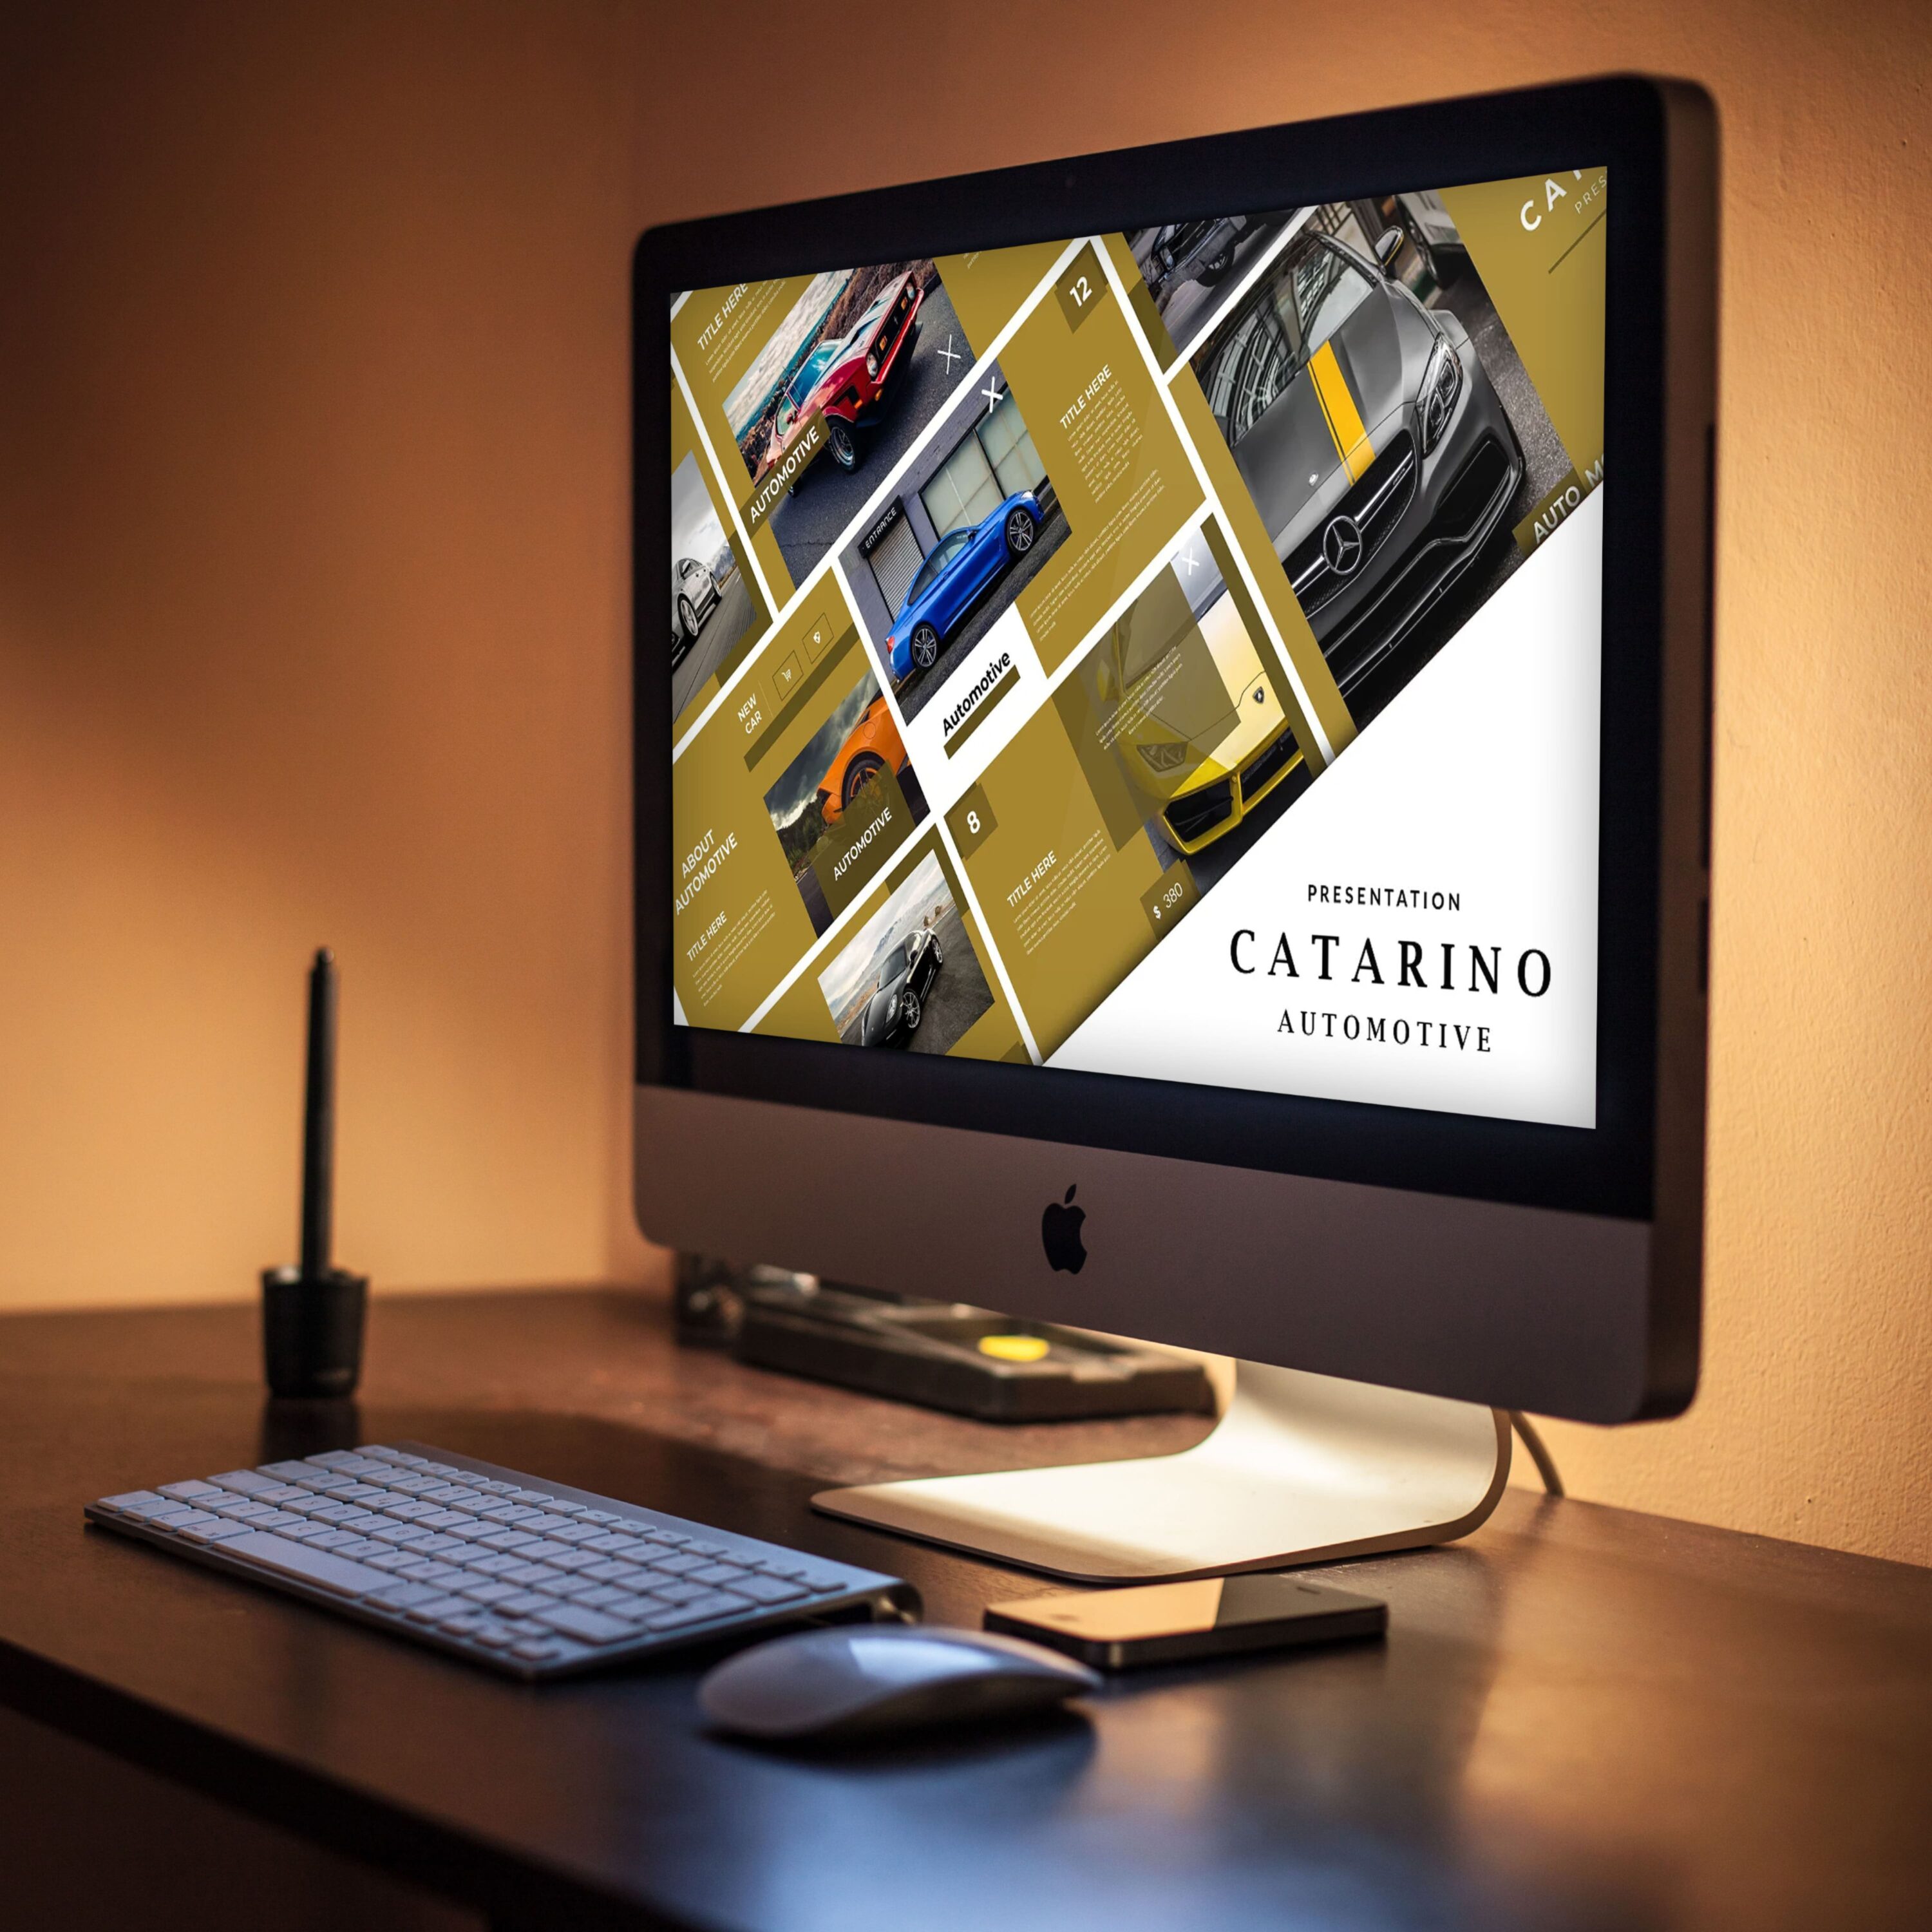 Catarino Automotive Sport Powerpoint cover.